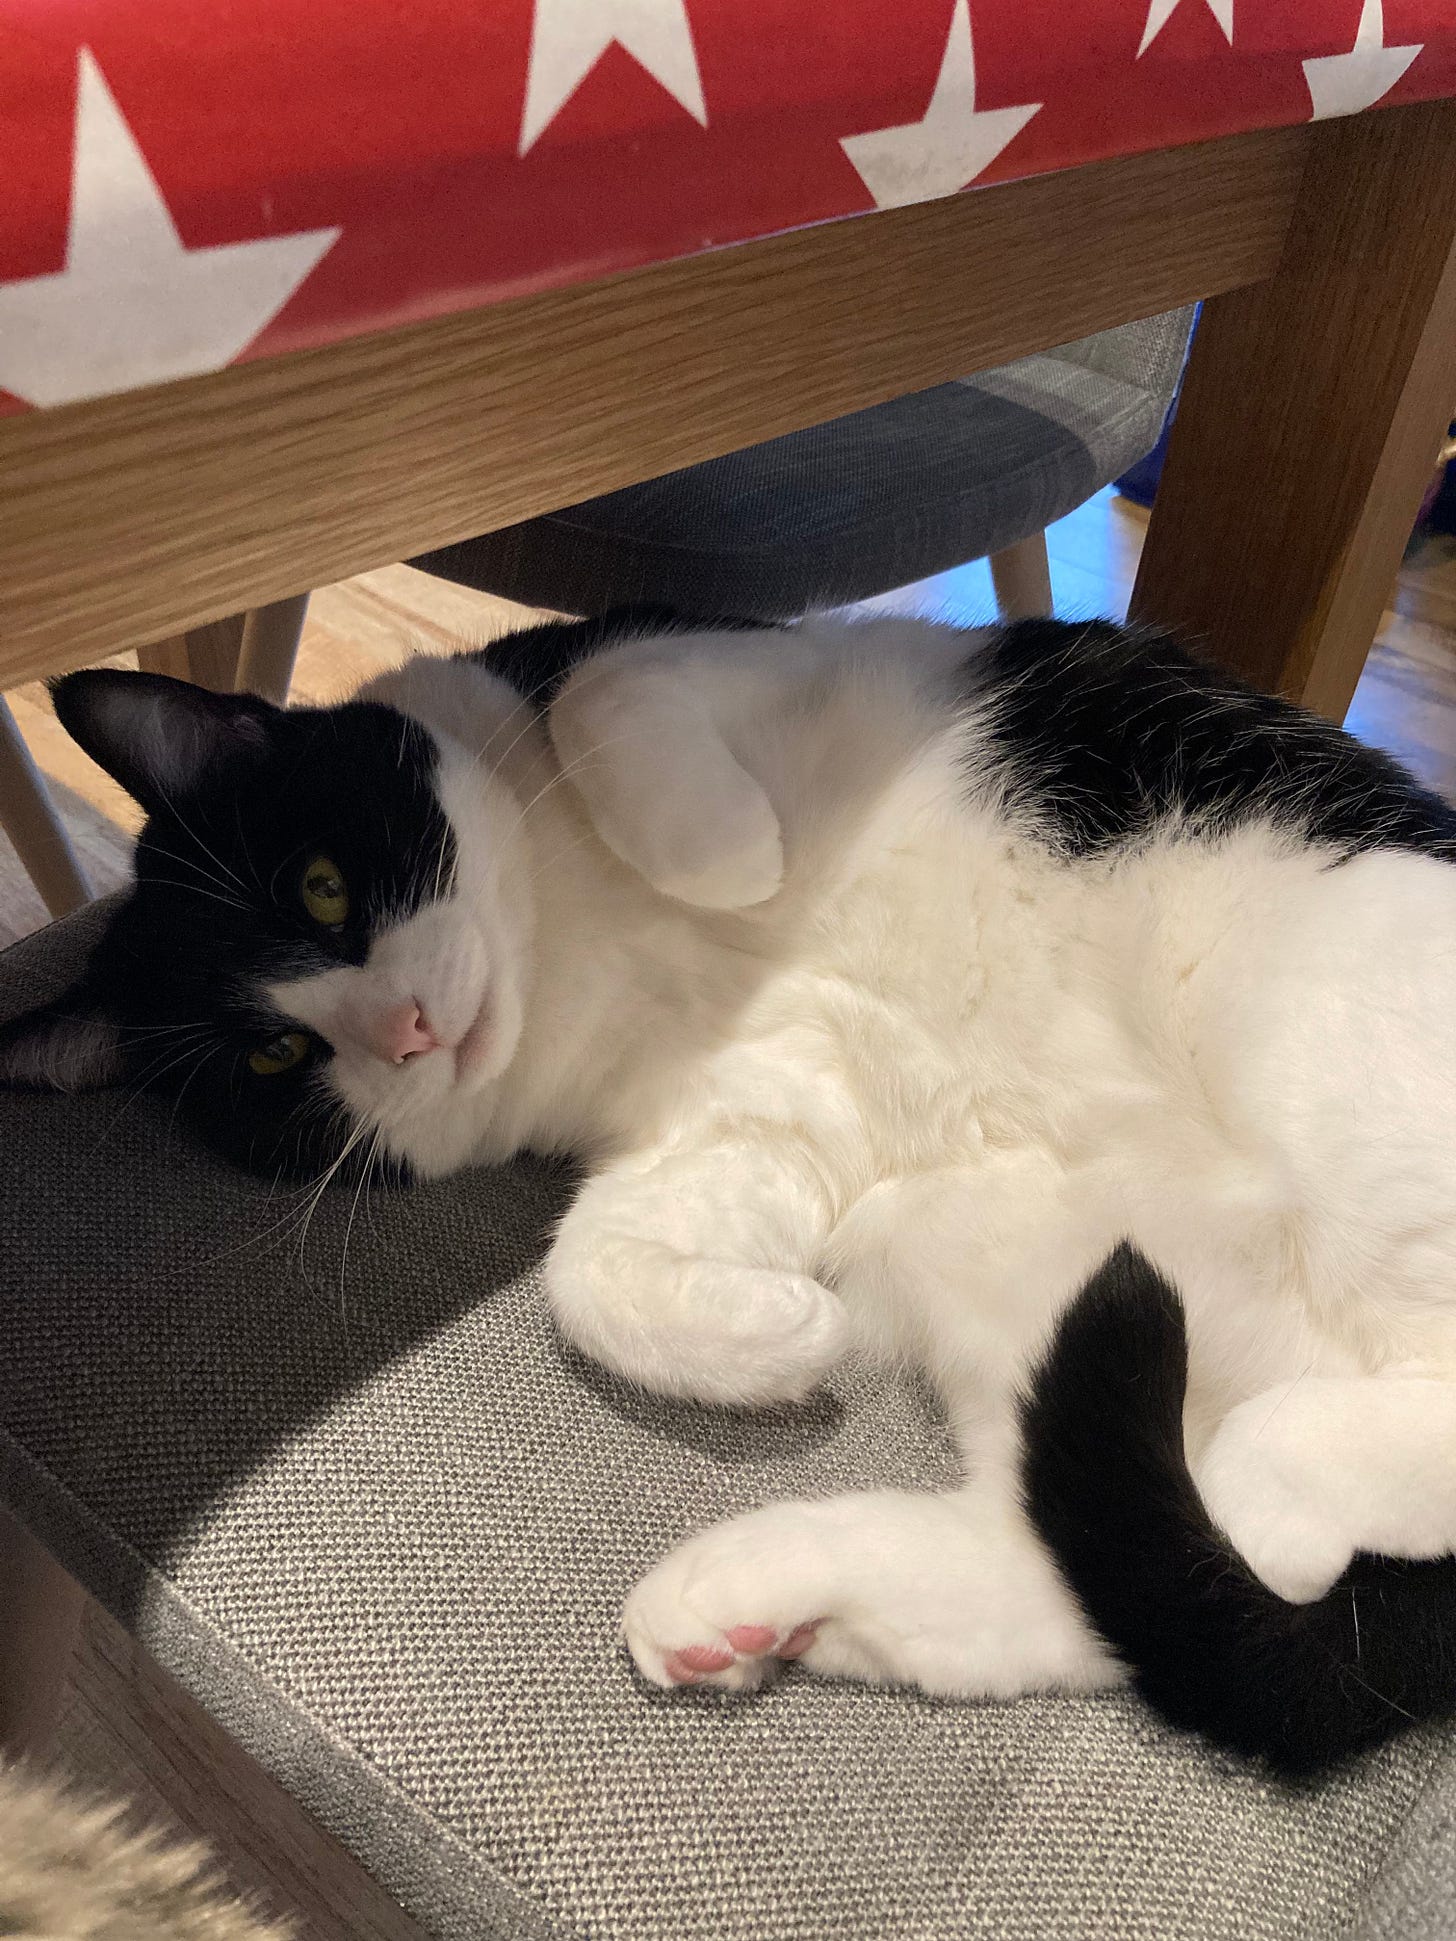 A black and white cat sitting on a dining room chair, exposing her tummy for tickles. The table has a red and white starred oil cloth.